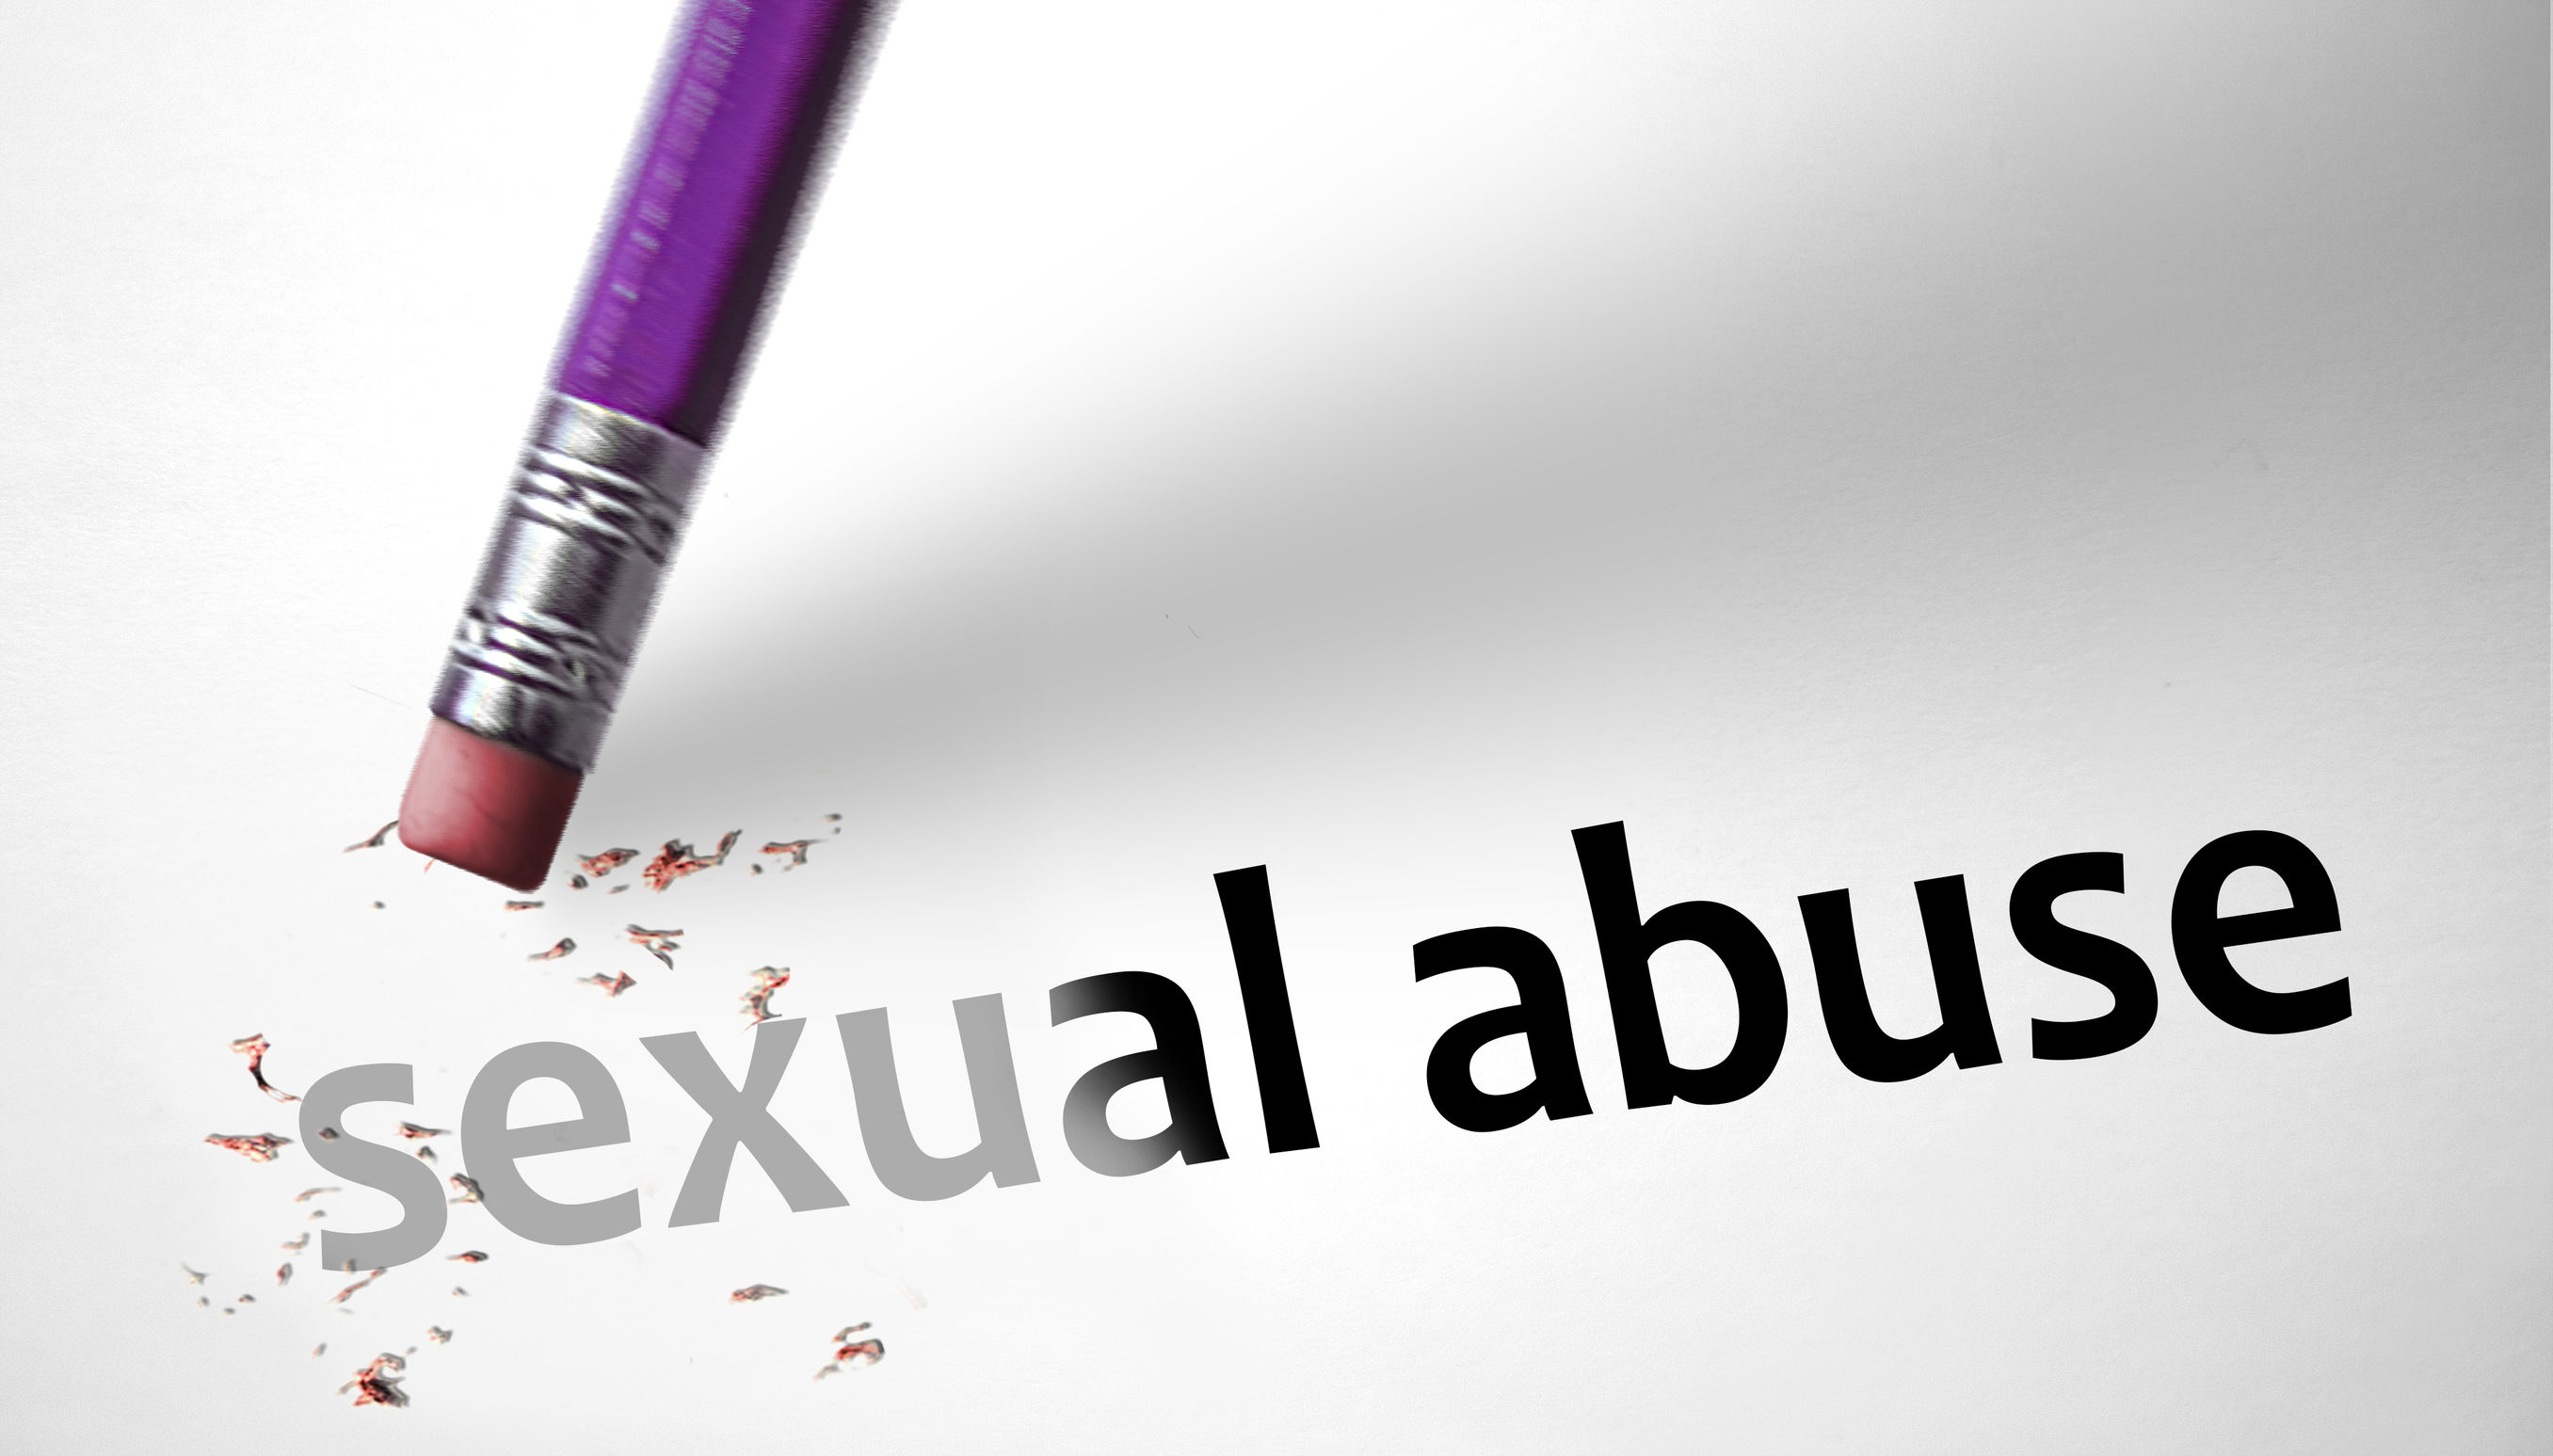 Image of an inverted pencil, with the eraser on its end rubbing away the text “sexual abuse”.